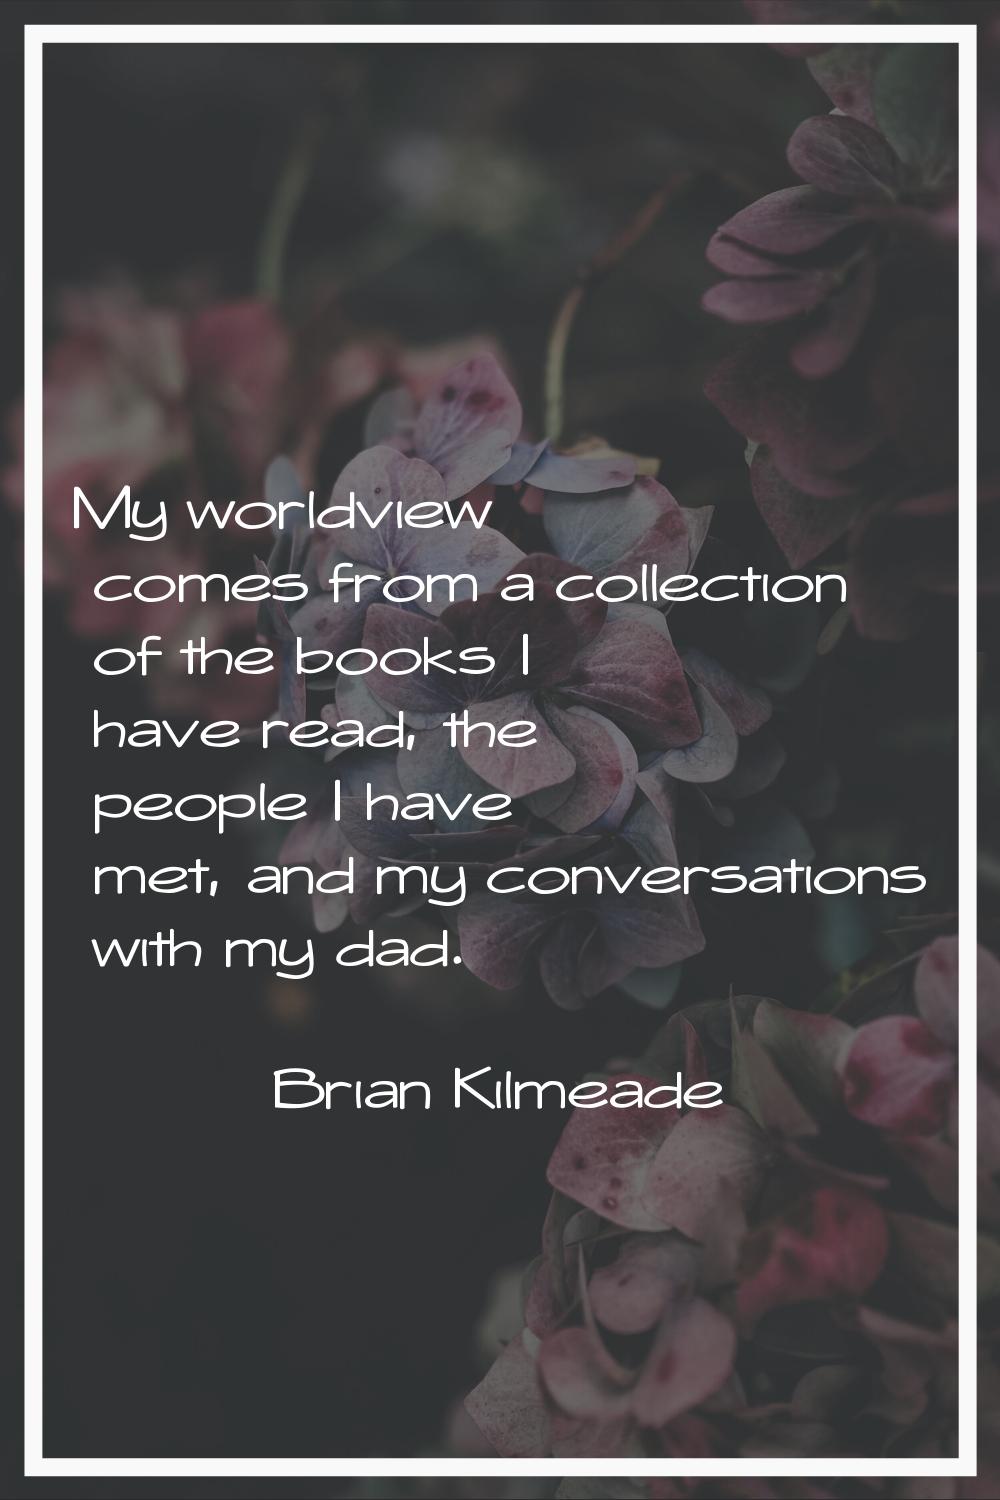 My worldview comes from a collection of the books I have read, the people I have met, and my conver